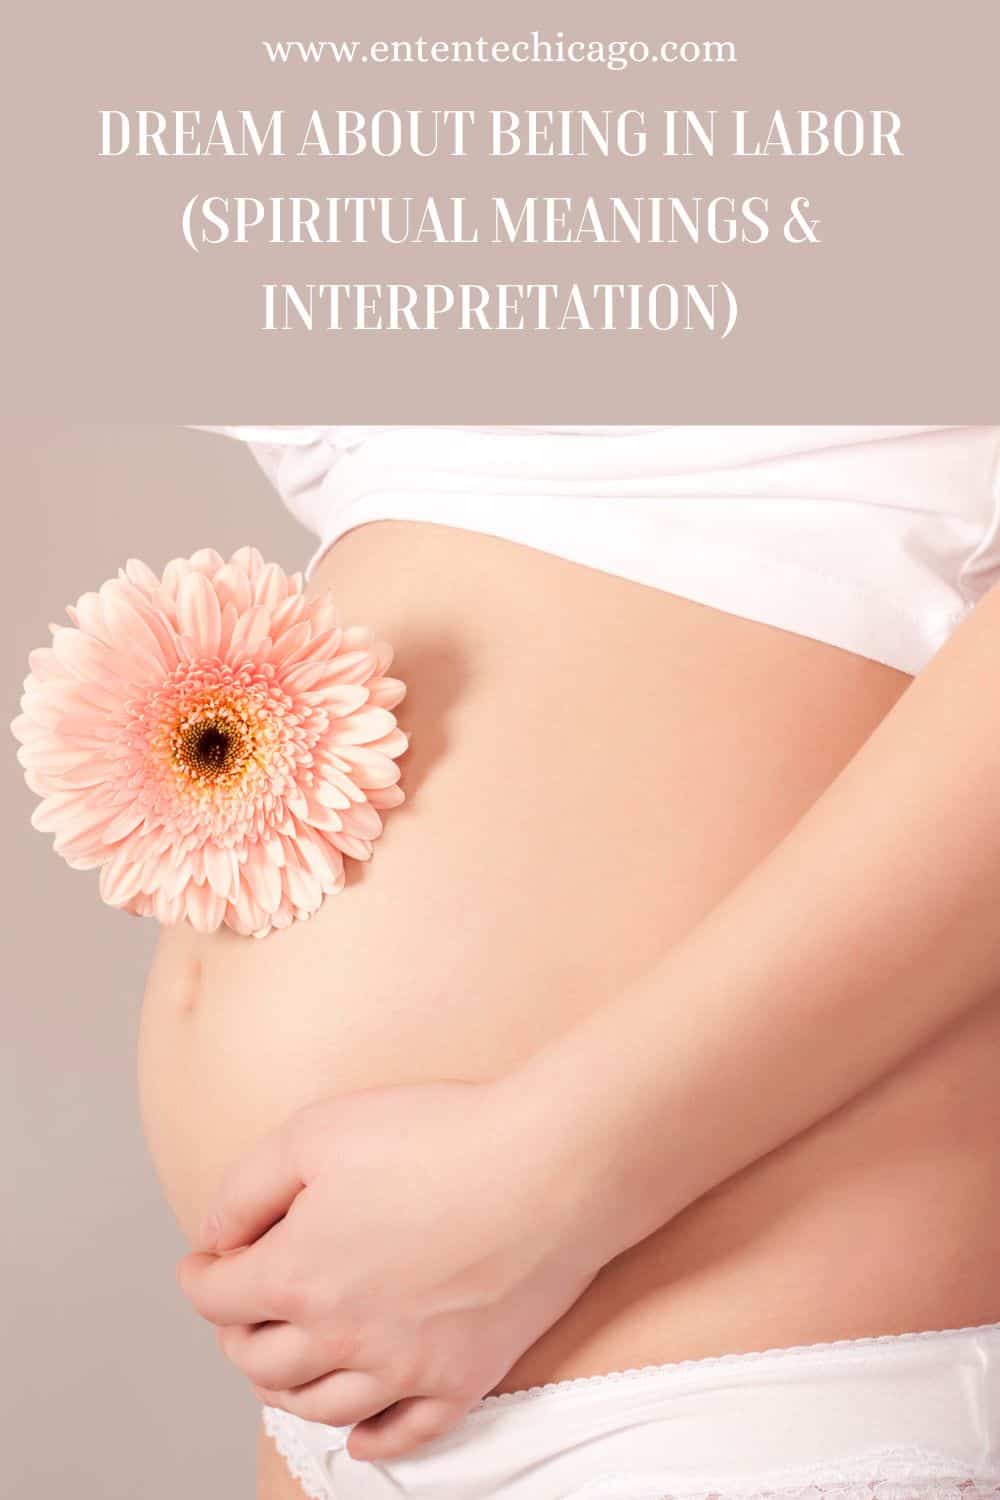 Dream About Being in Labor (Spiritual Meanings & Interpretation)